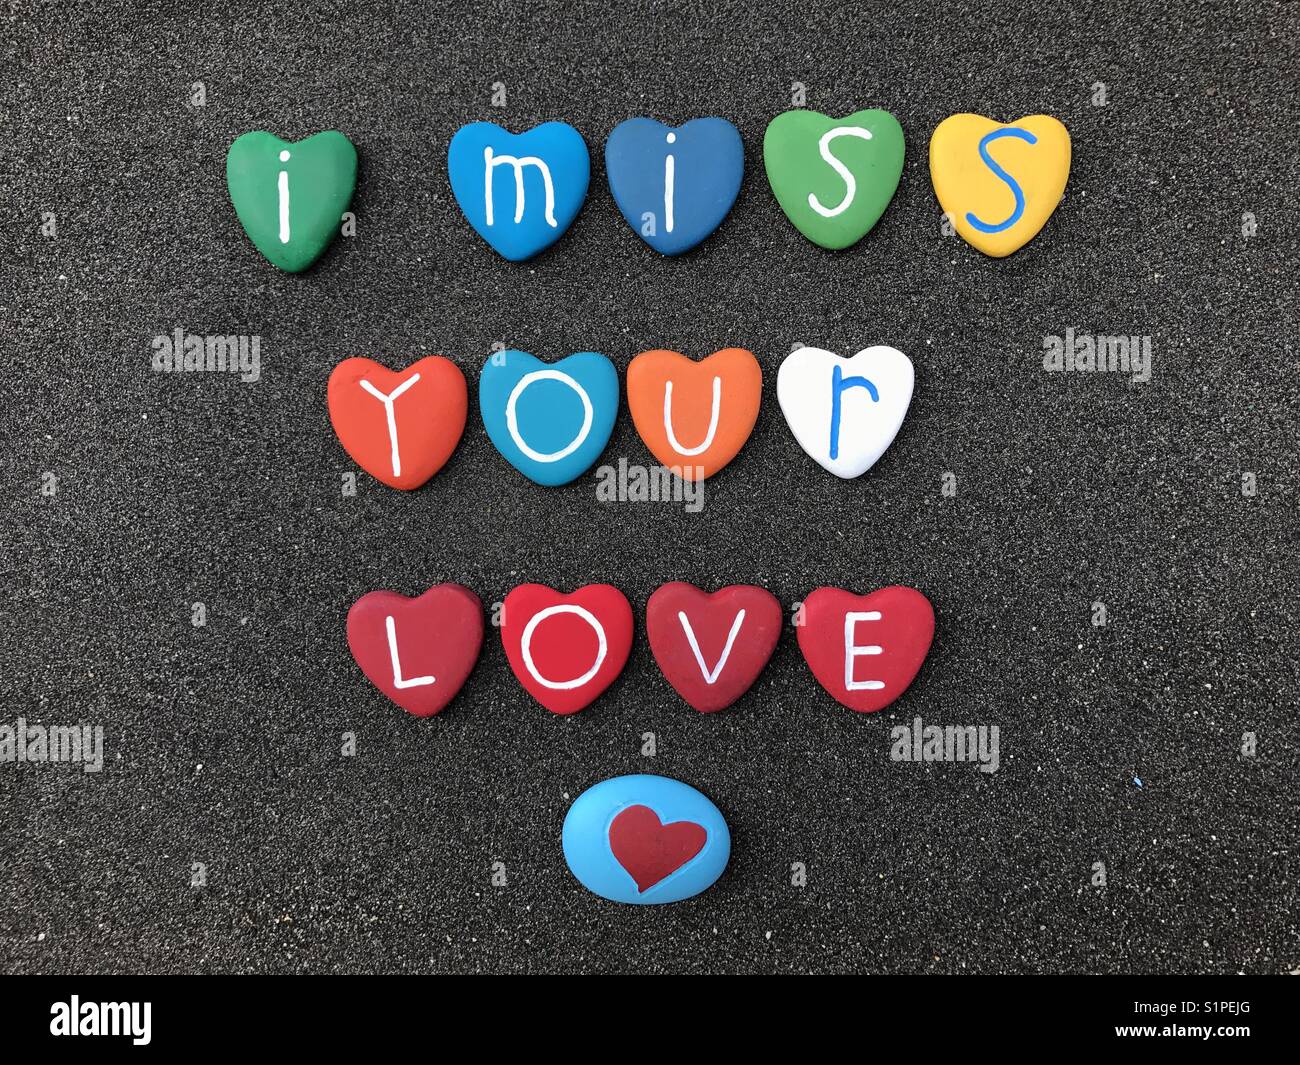 I miss your love Stock Photo